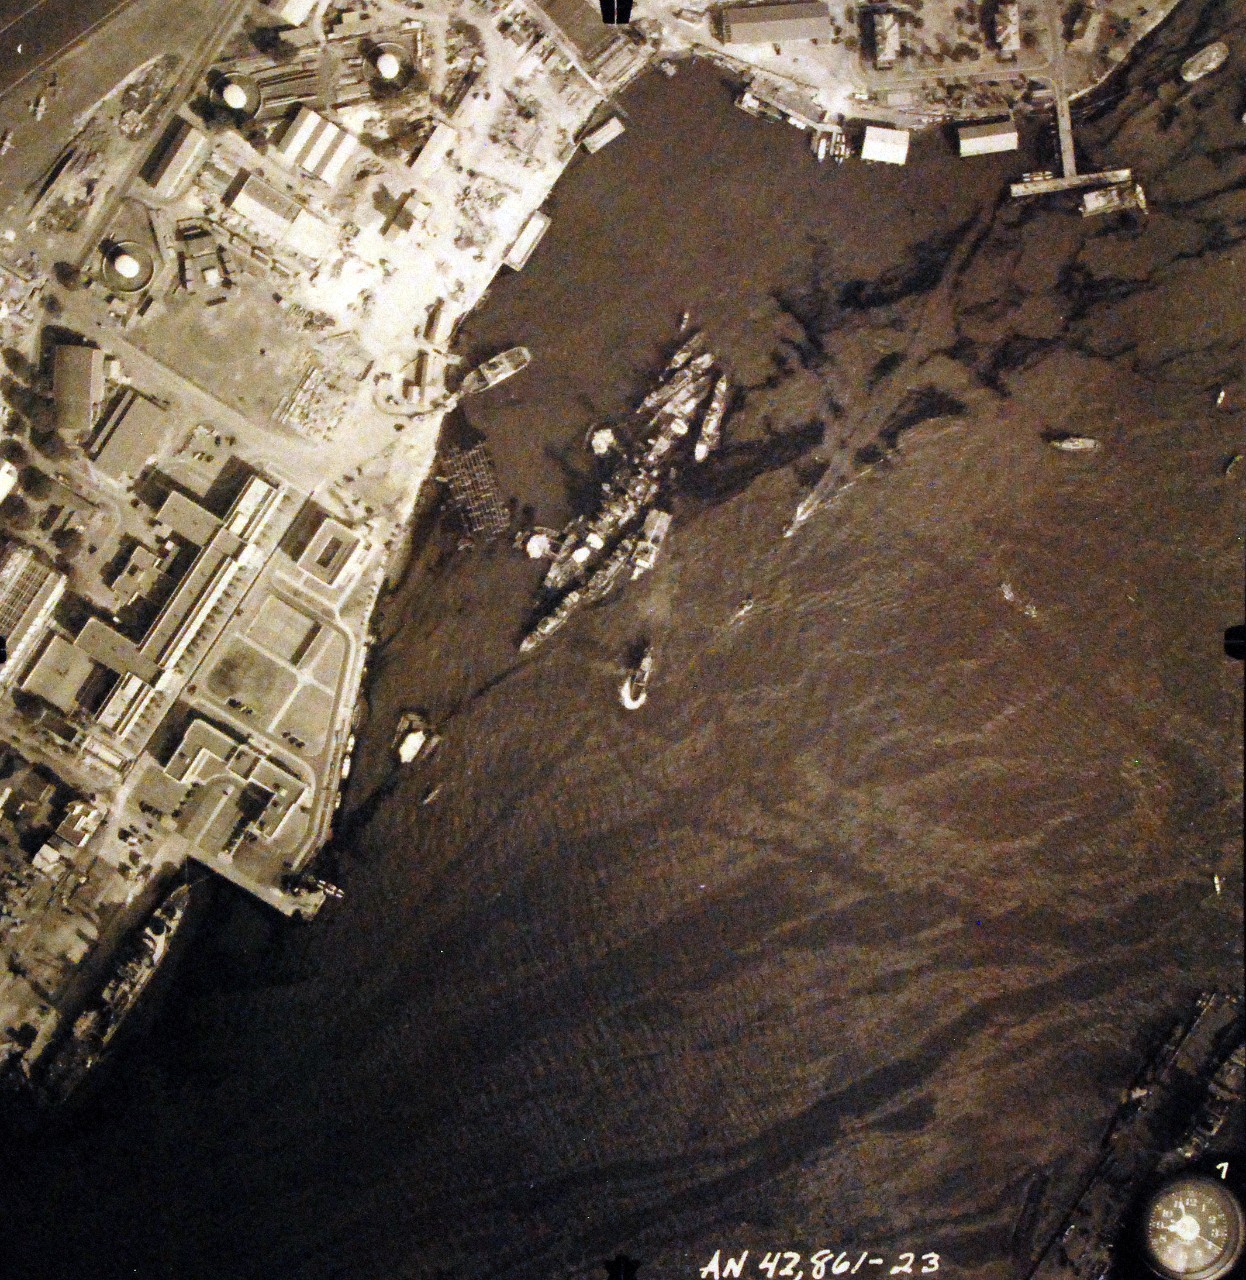 80-G-387584:  Pearl Harbor Attack, 7 December 1941.  Aerial view of "Battleship Row" moorings on the southern side of Ford Island, 10 December 1941, showing damage from the Japanese raid three days earlier.  USS California (BB 44) is shown.  Note dark oil streaks on the harbor surface, originating from the sunken battleships. Photographed by VJ-1 at an altitude of 3,000 feet and released November 9, 1950. U.S. Navy photograph, now in the collections of the National Archives.     (9/22/2015).